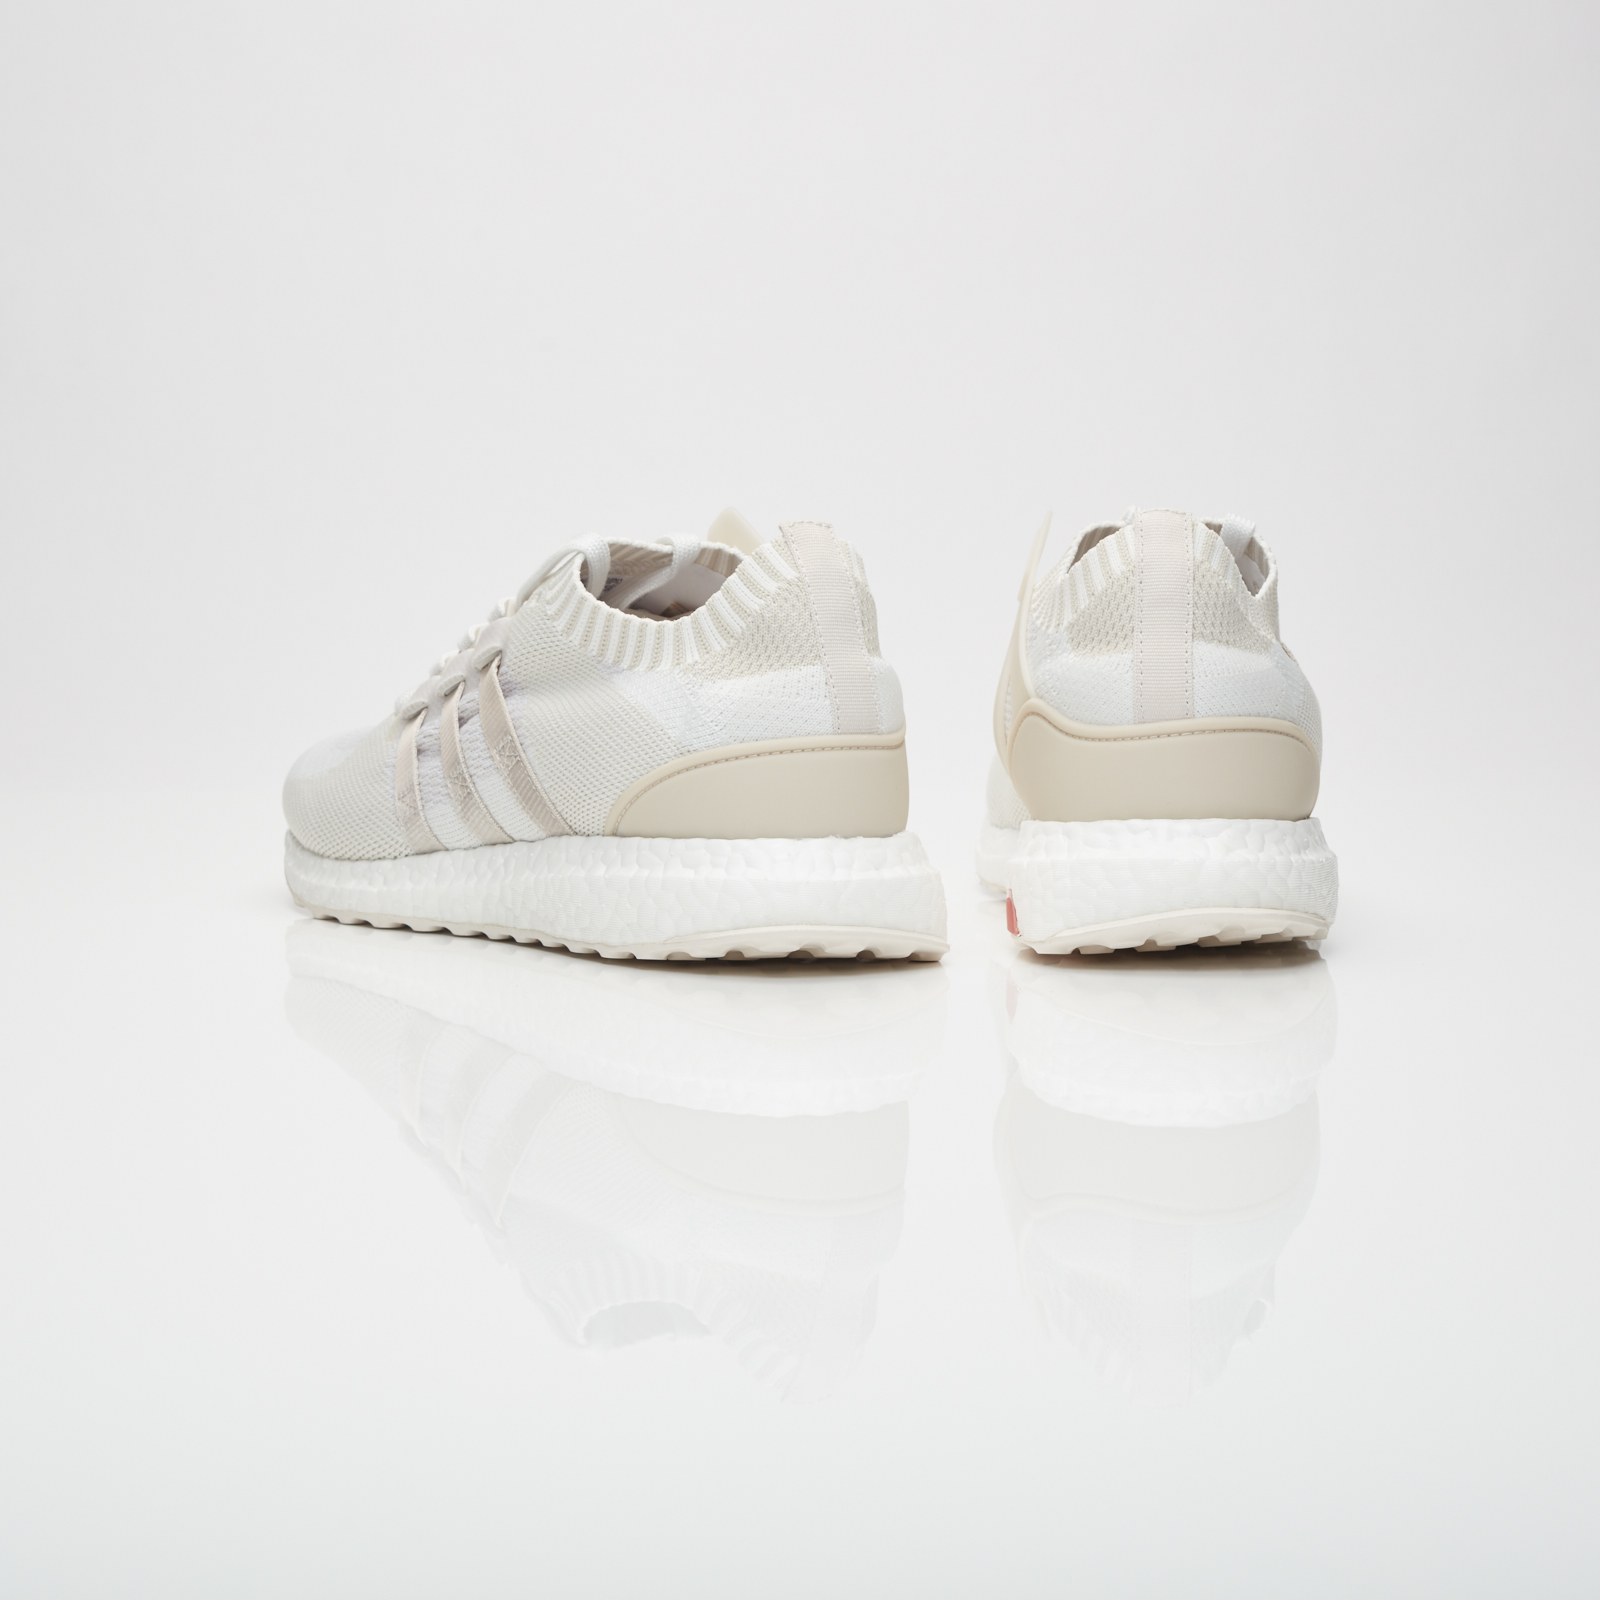 adidas-eqt-support-ultra-boost-pk-white-eqt-material-pack-3